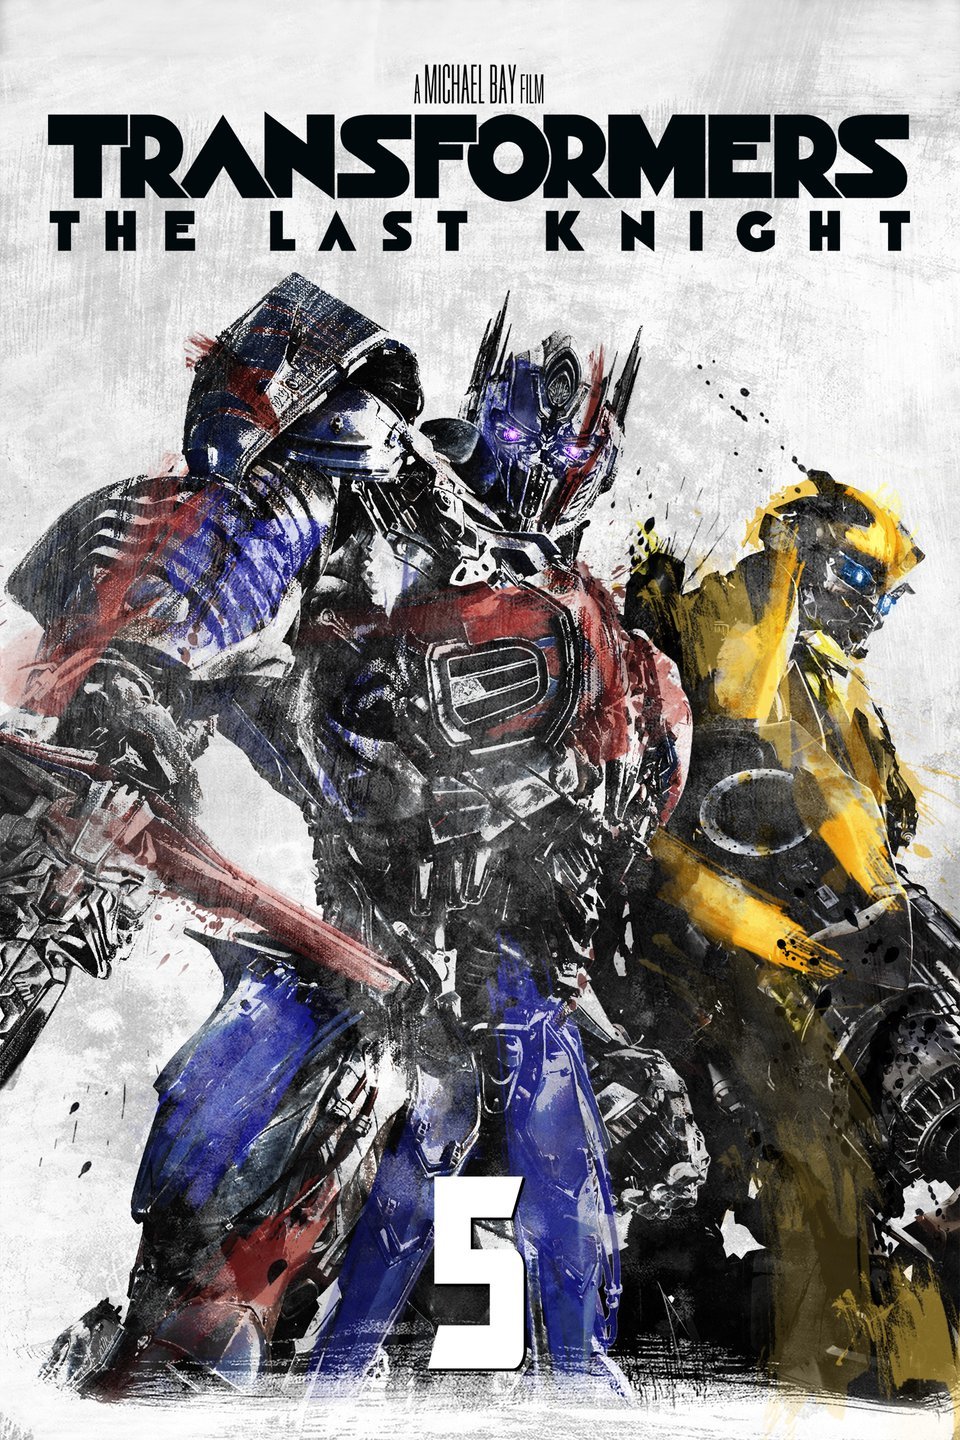 Paramount Pictures Transformers: The Last Knight